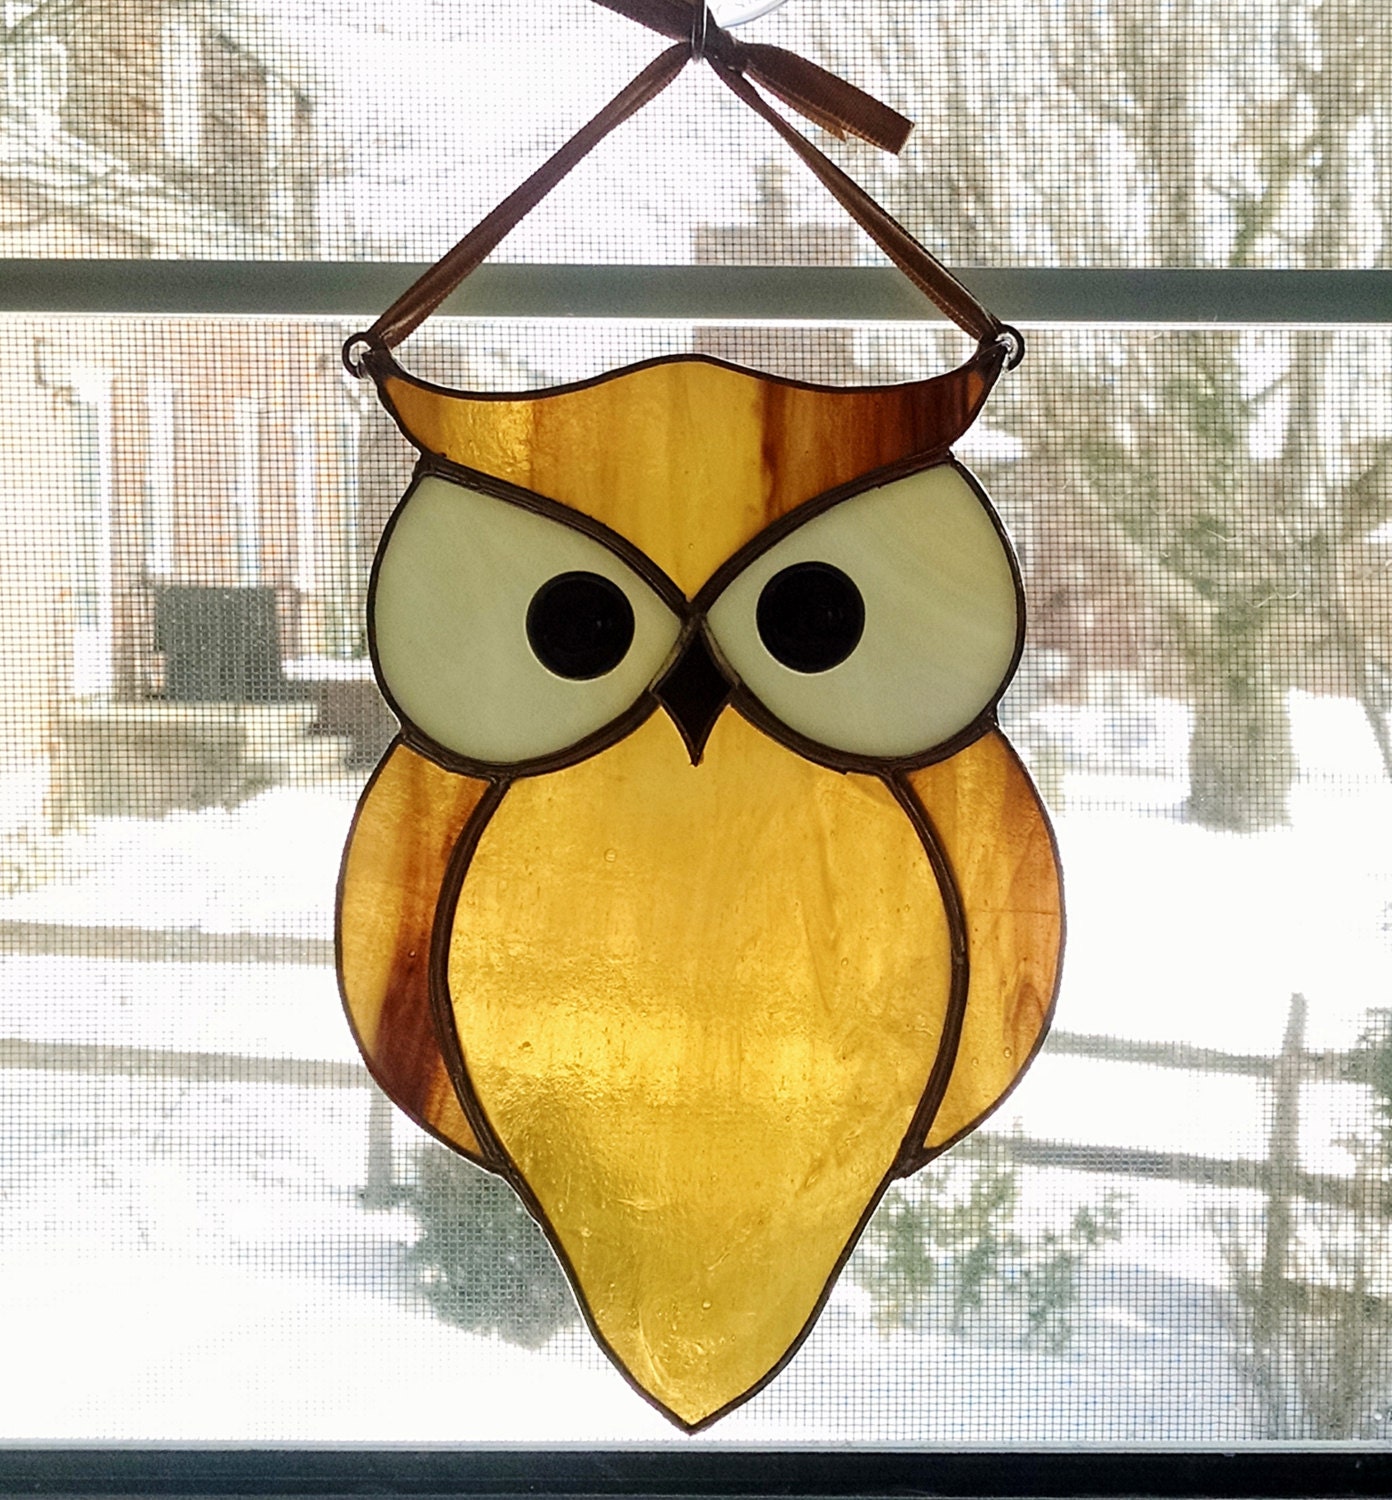  Stained Glass Owl  Suncatcher Gold and Brown Bird Ornament